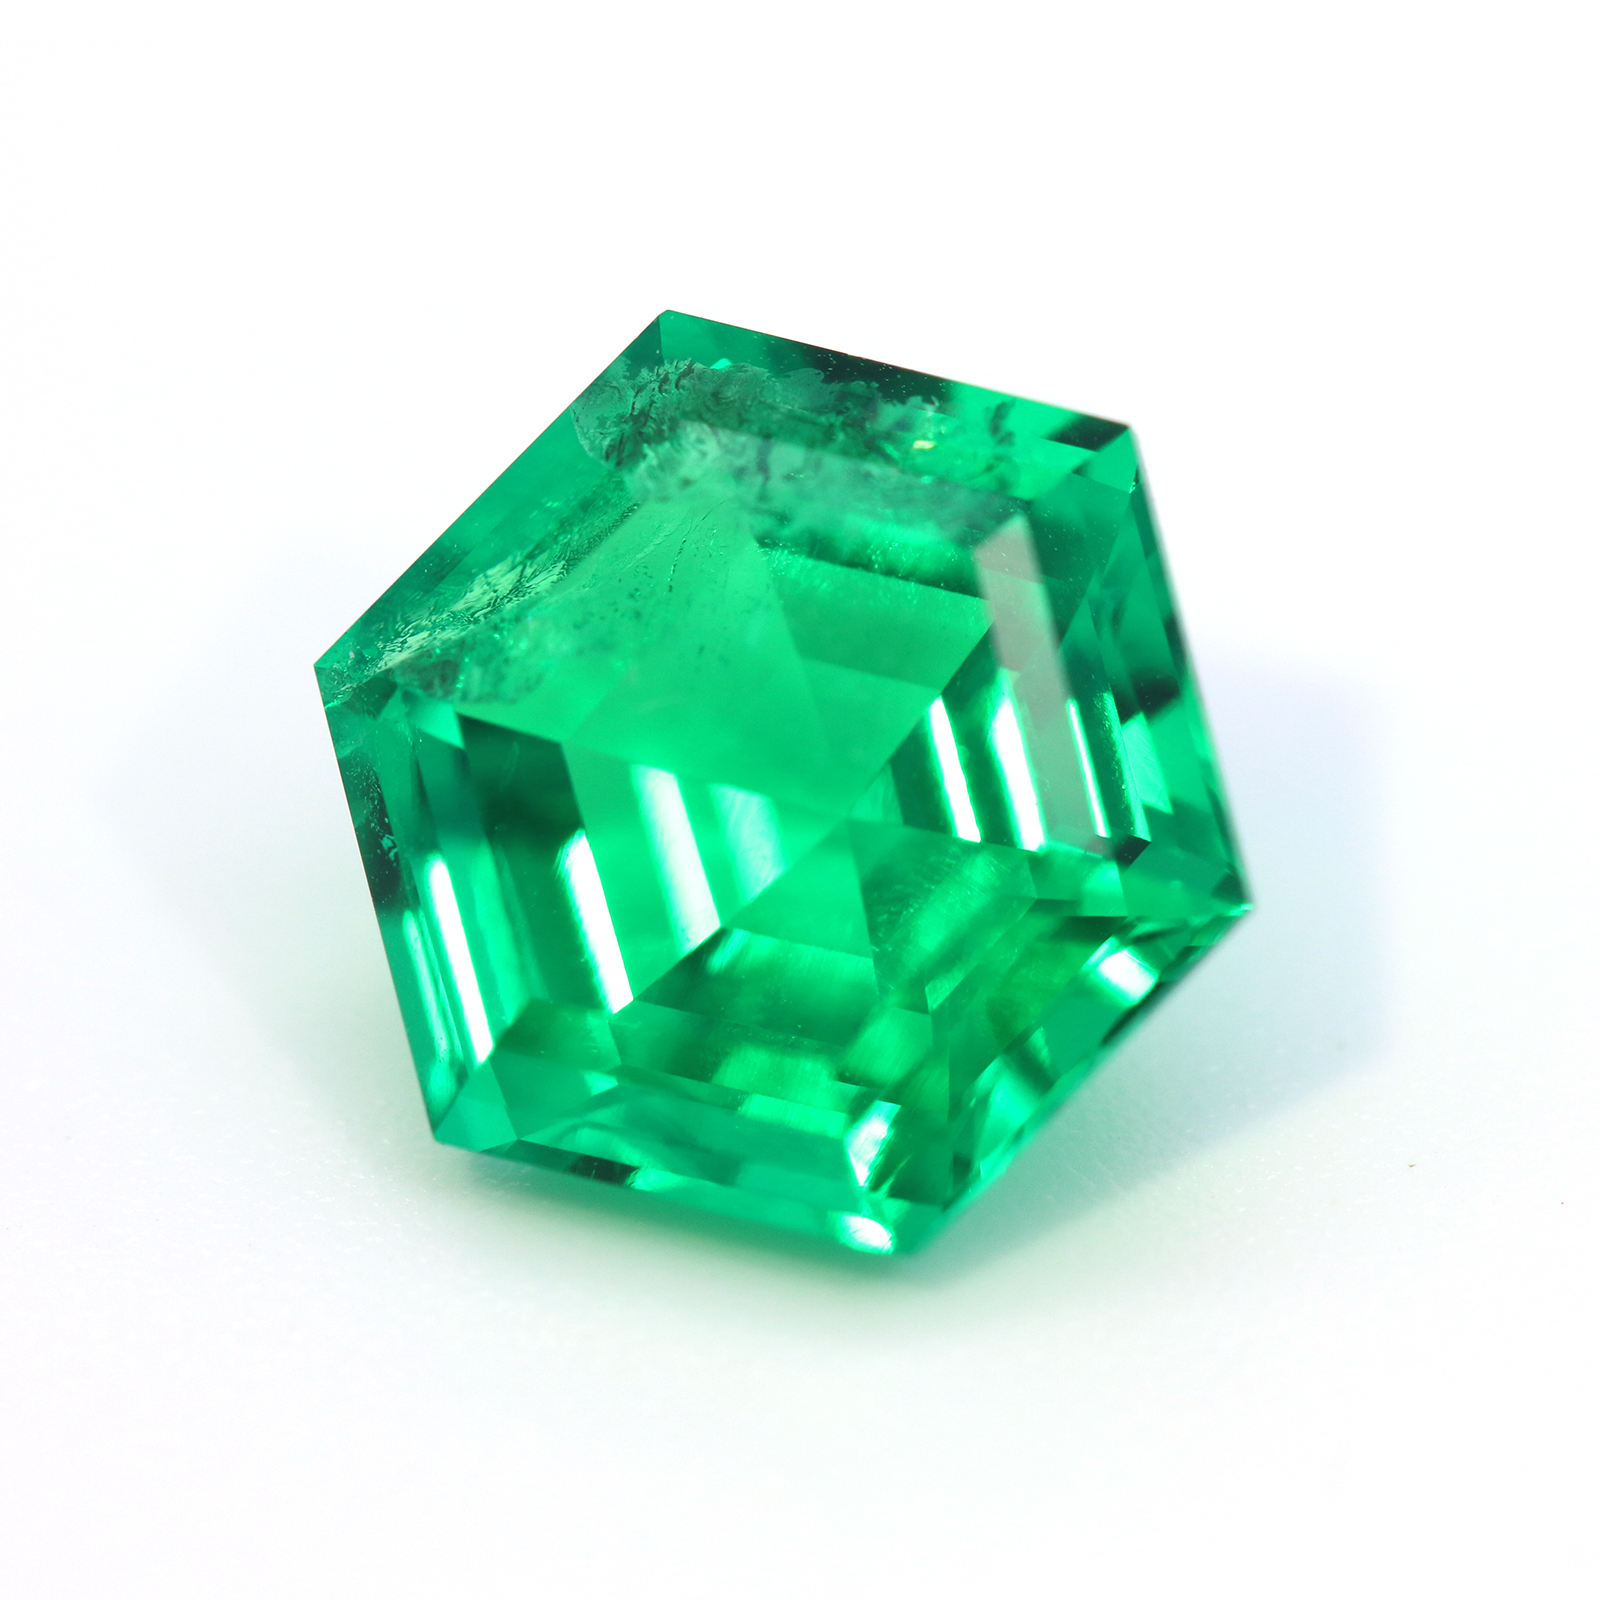 Are lab-grown emeralds cheaper?